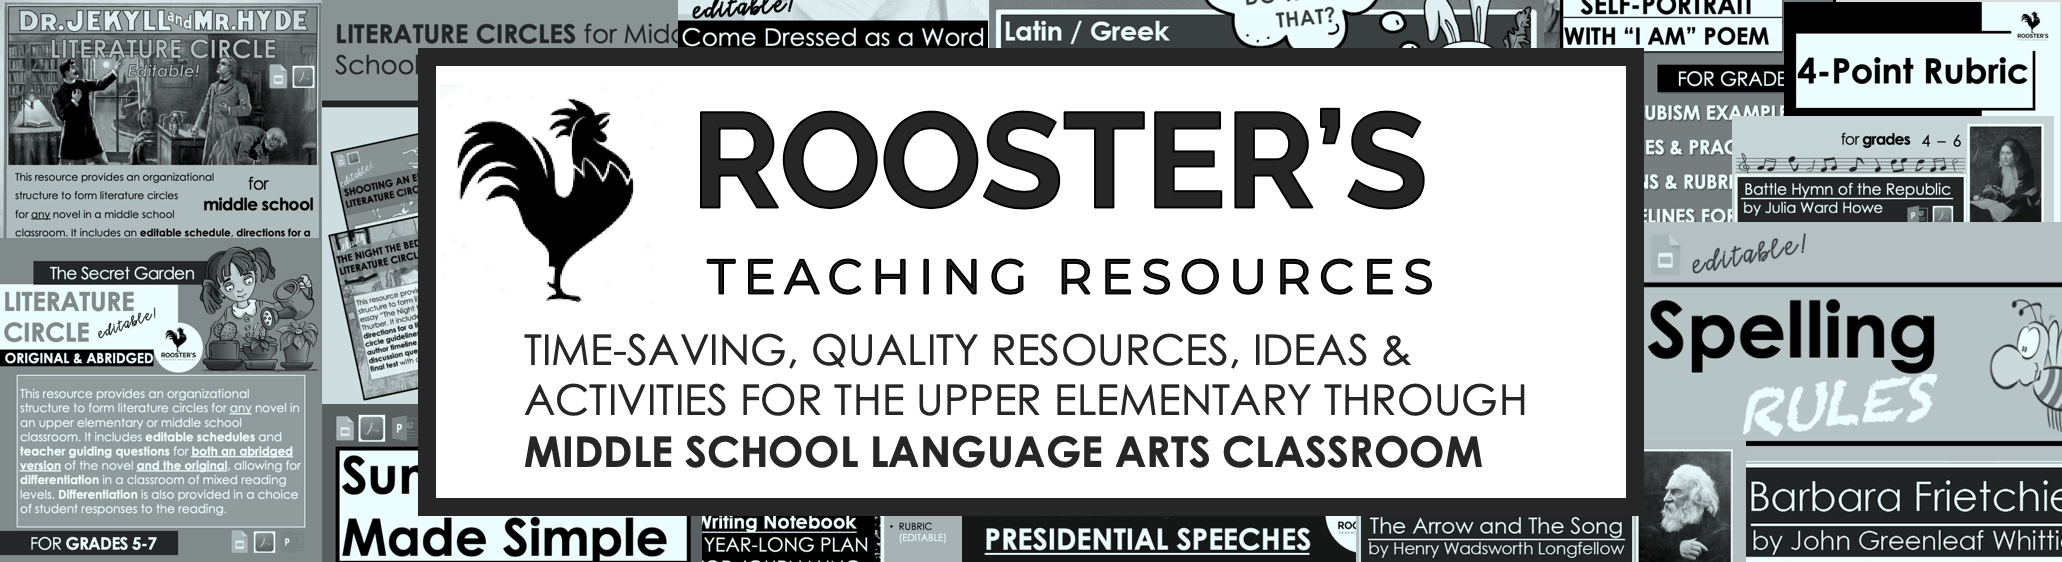 roosters-teaching-resources